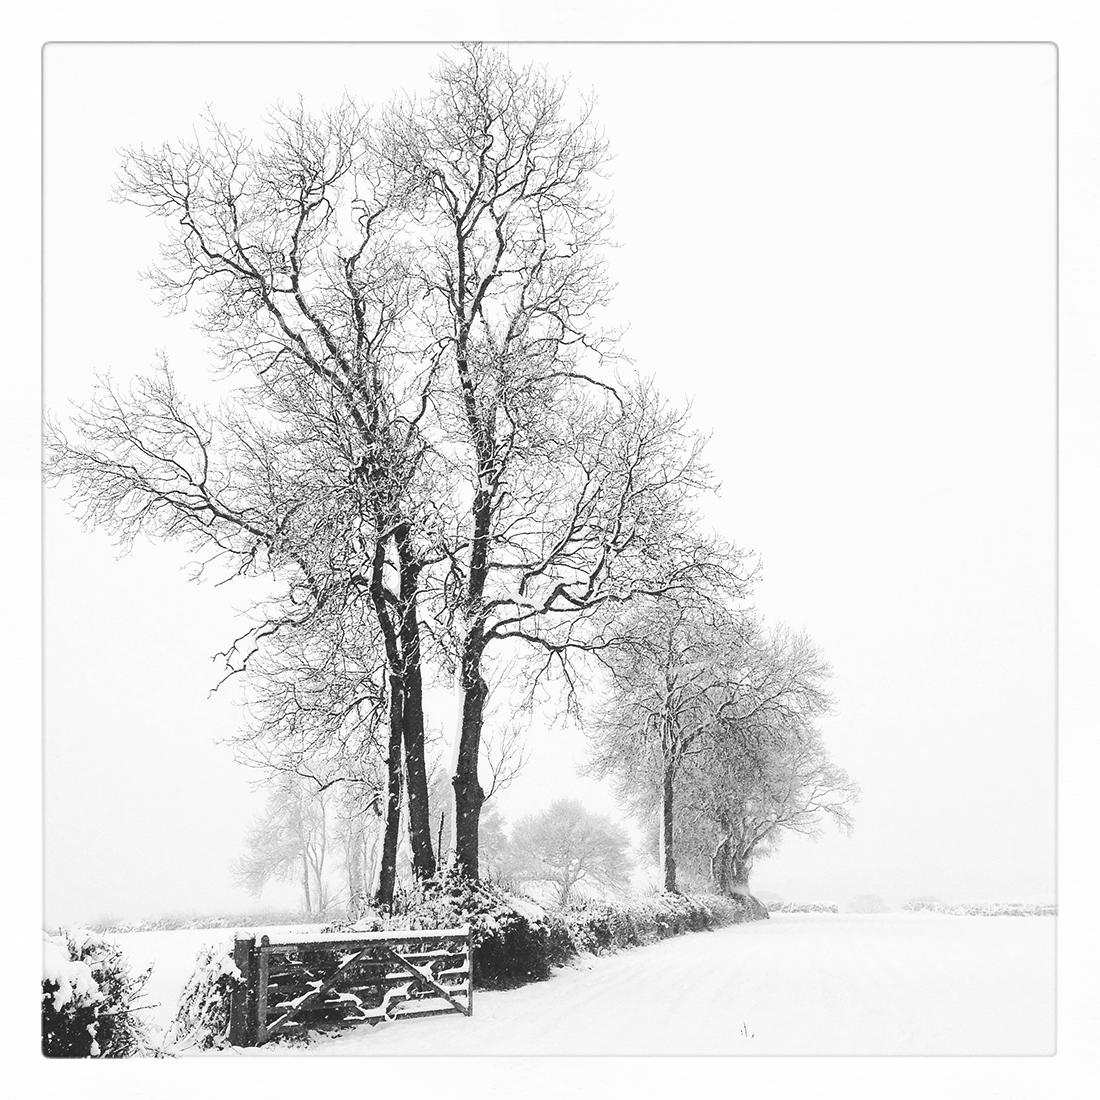 Ros Gomersall winning image for the Feeling of Winter photography competition